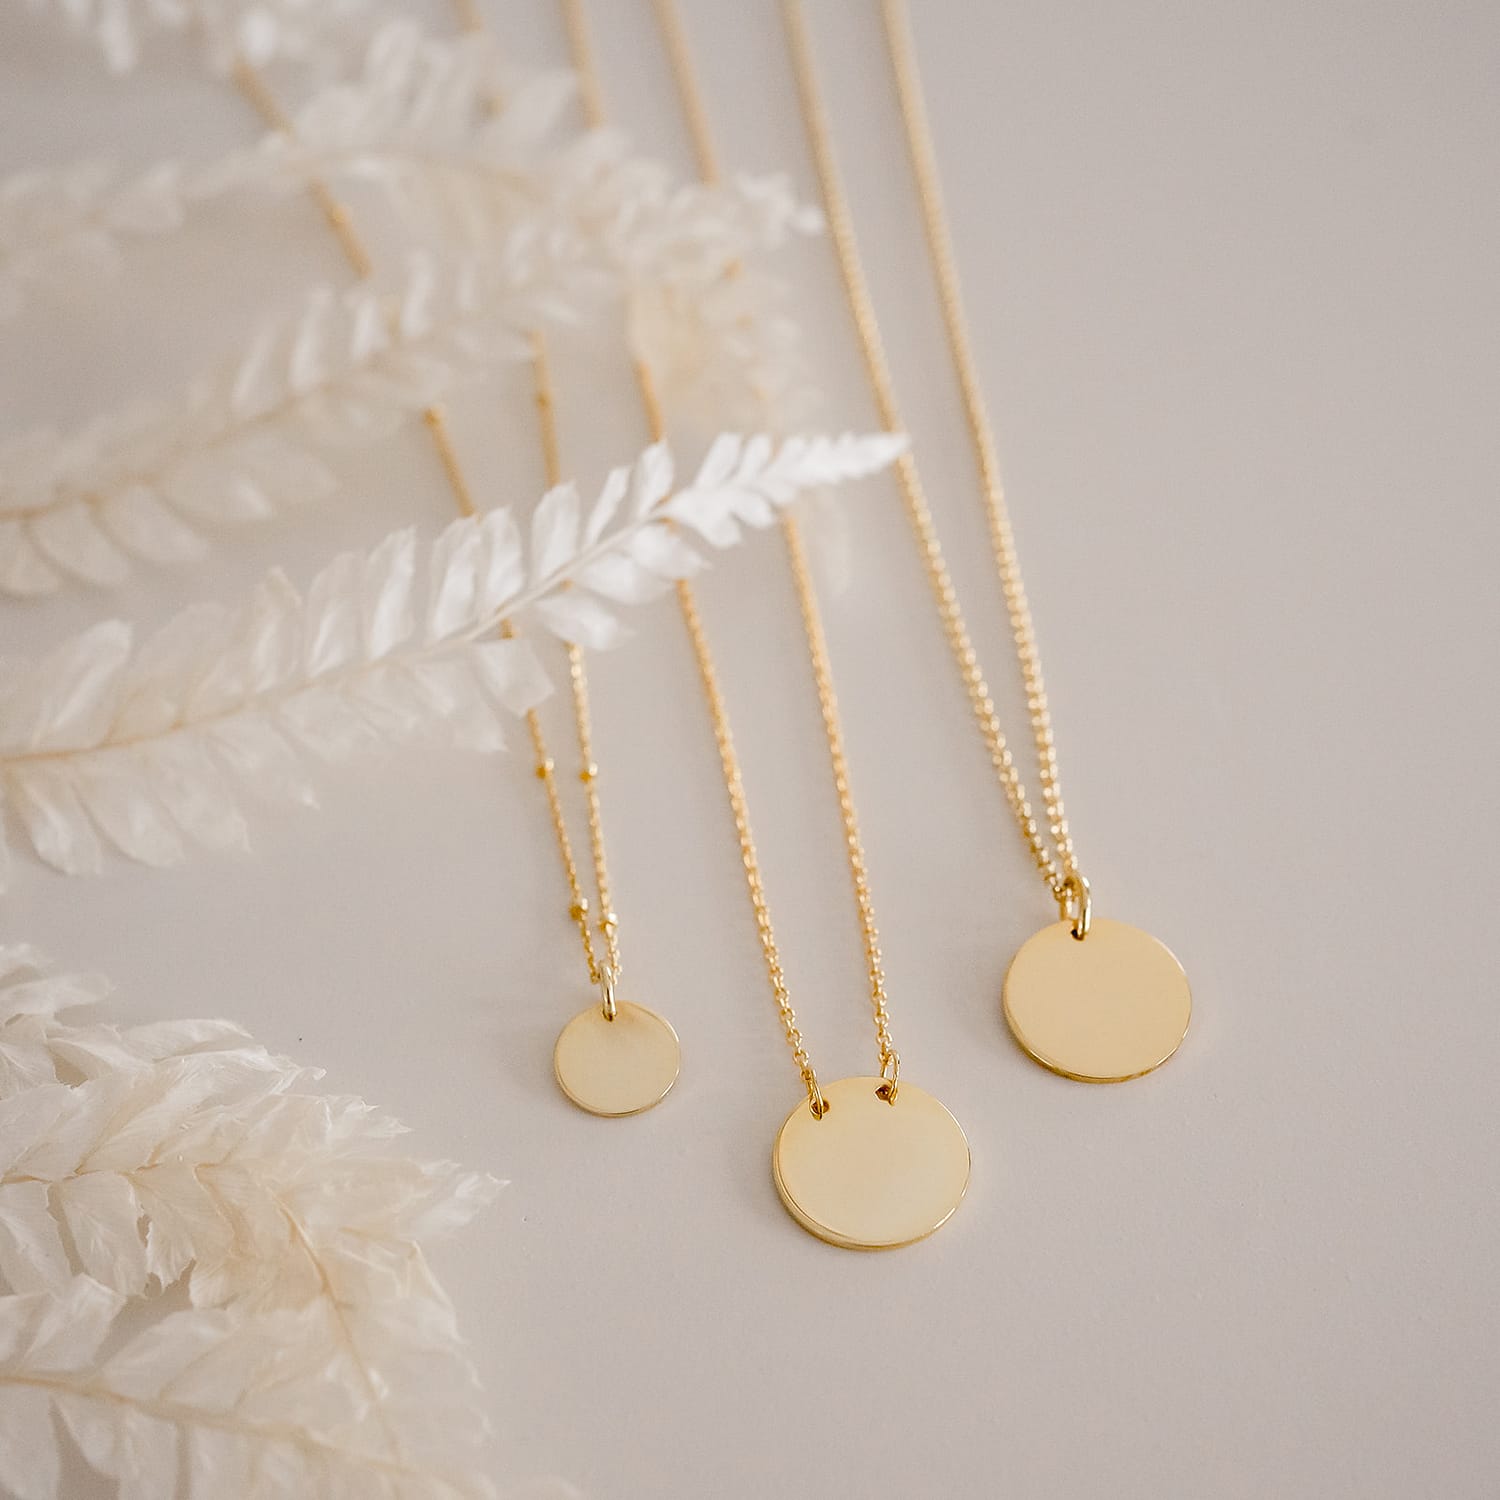 yellow gold disc necklaces you can engrave